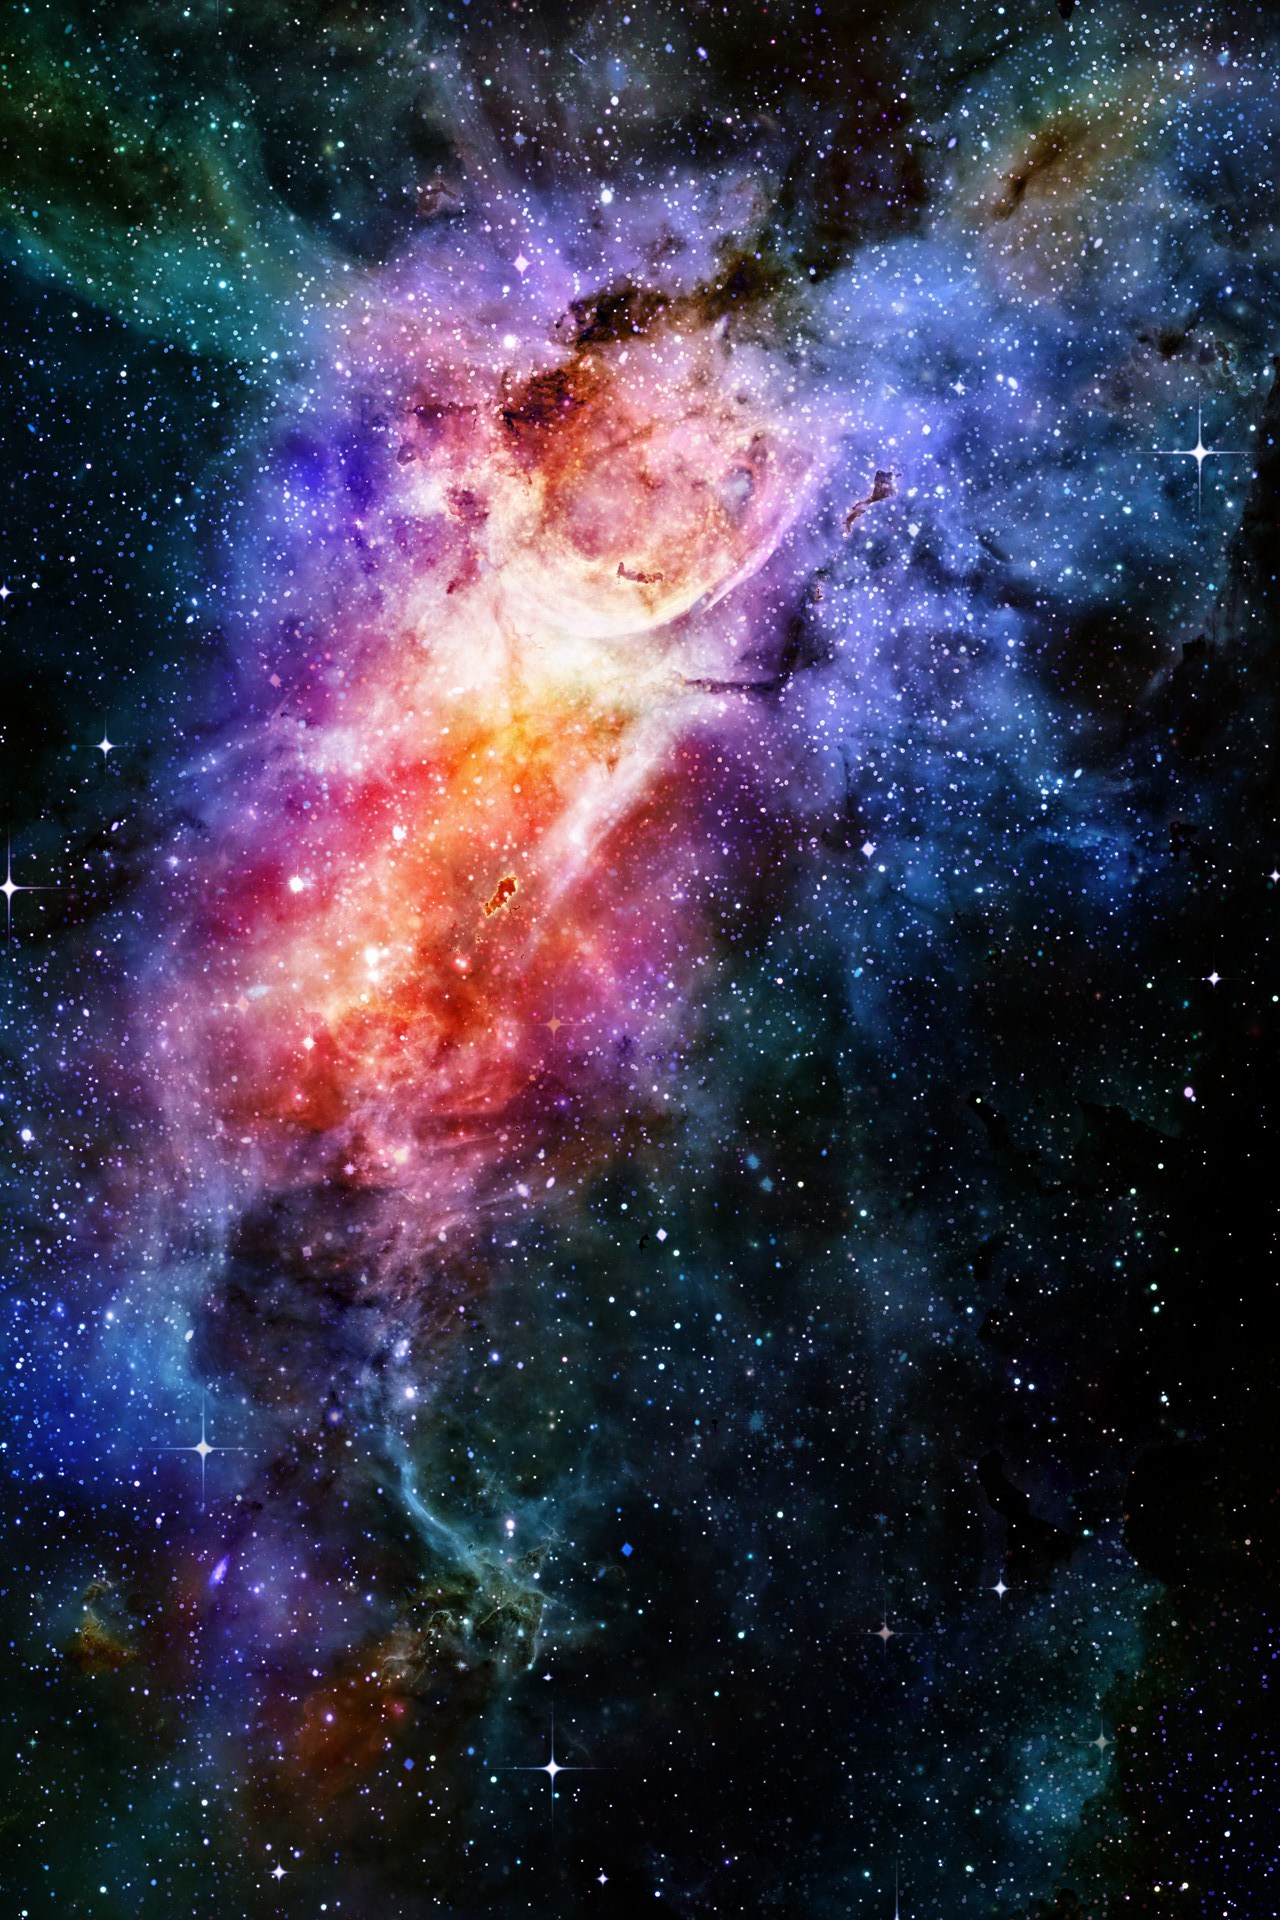 Galaxy background for iphone